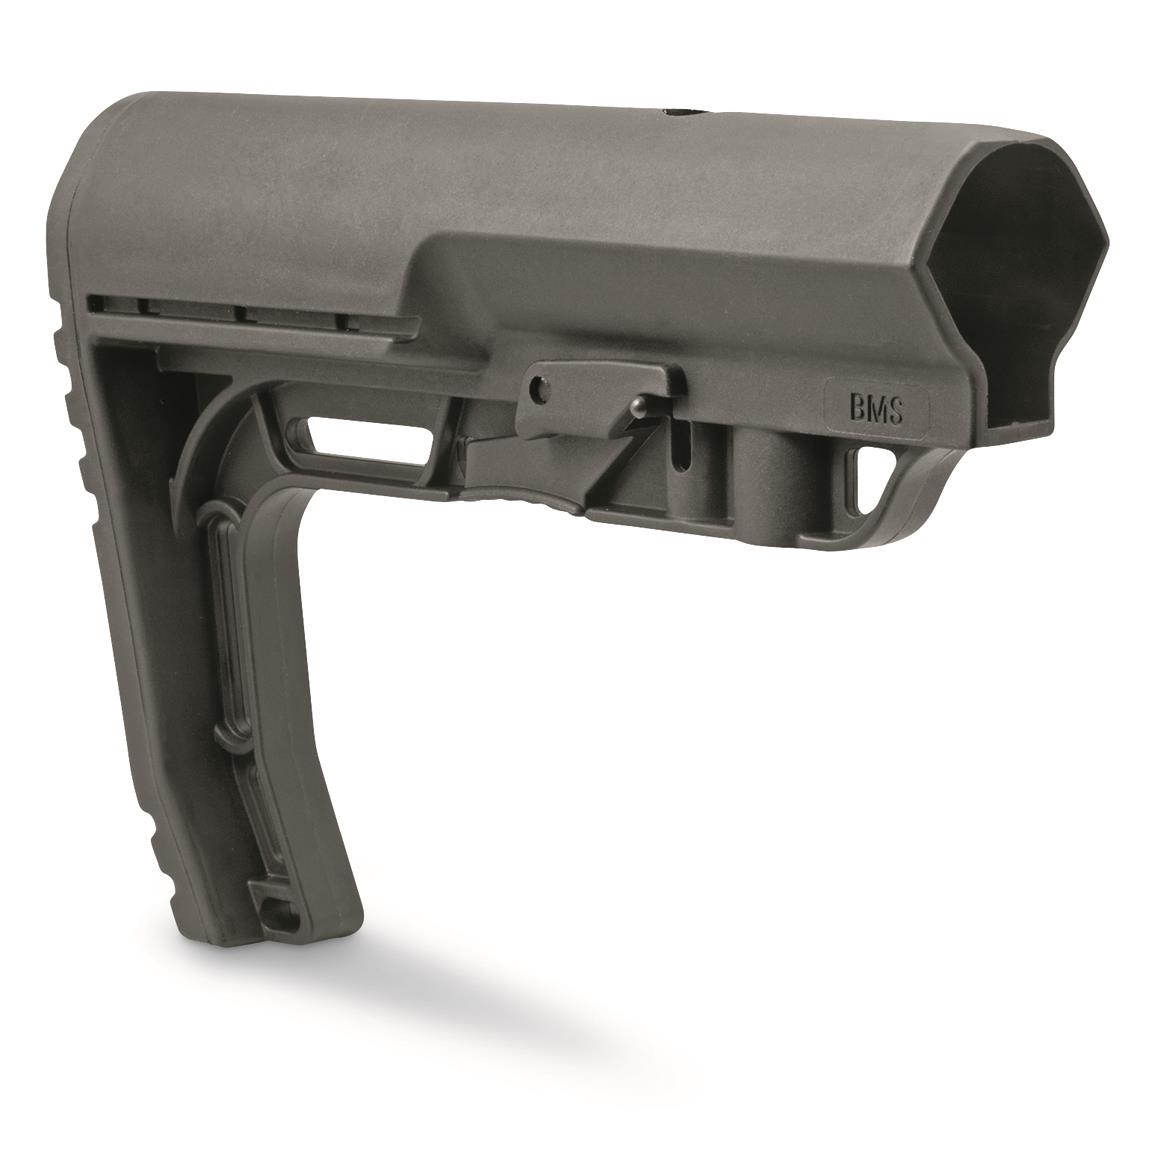 Mission First Tactical Battlelink Minimalist Stock, Restricted State Compliant, Black